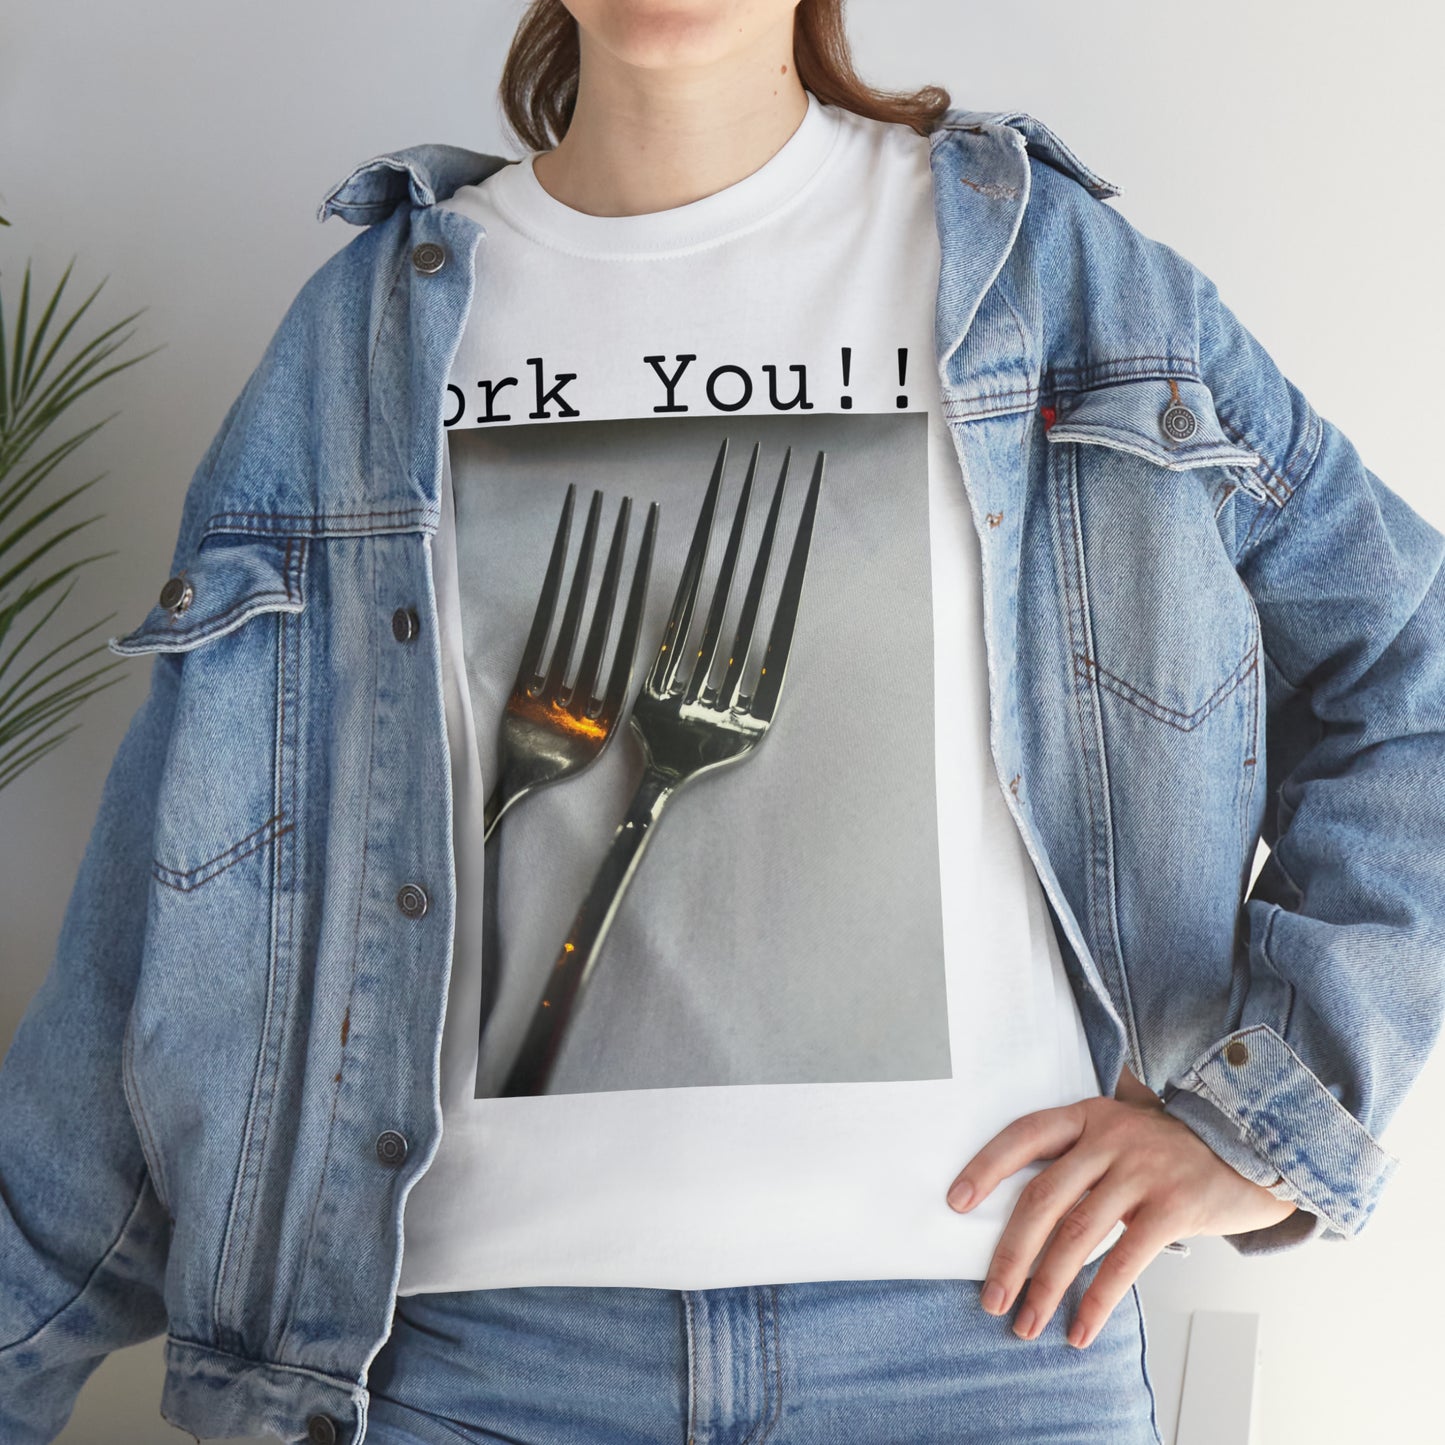 Fork You!!! - Hurts Shirts Collection